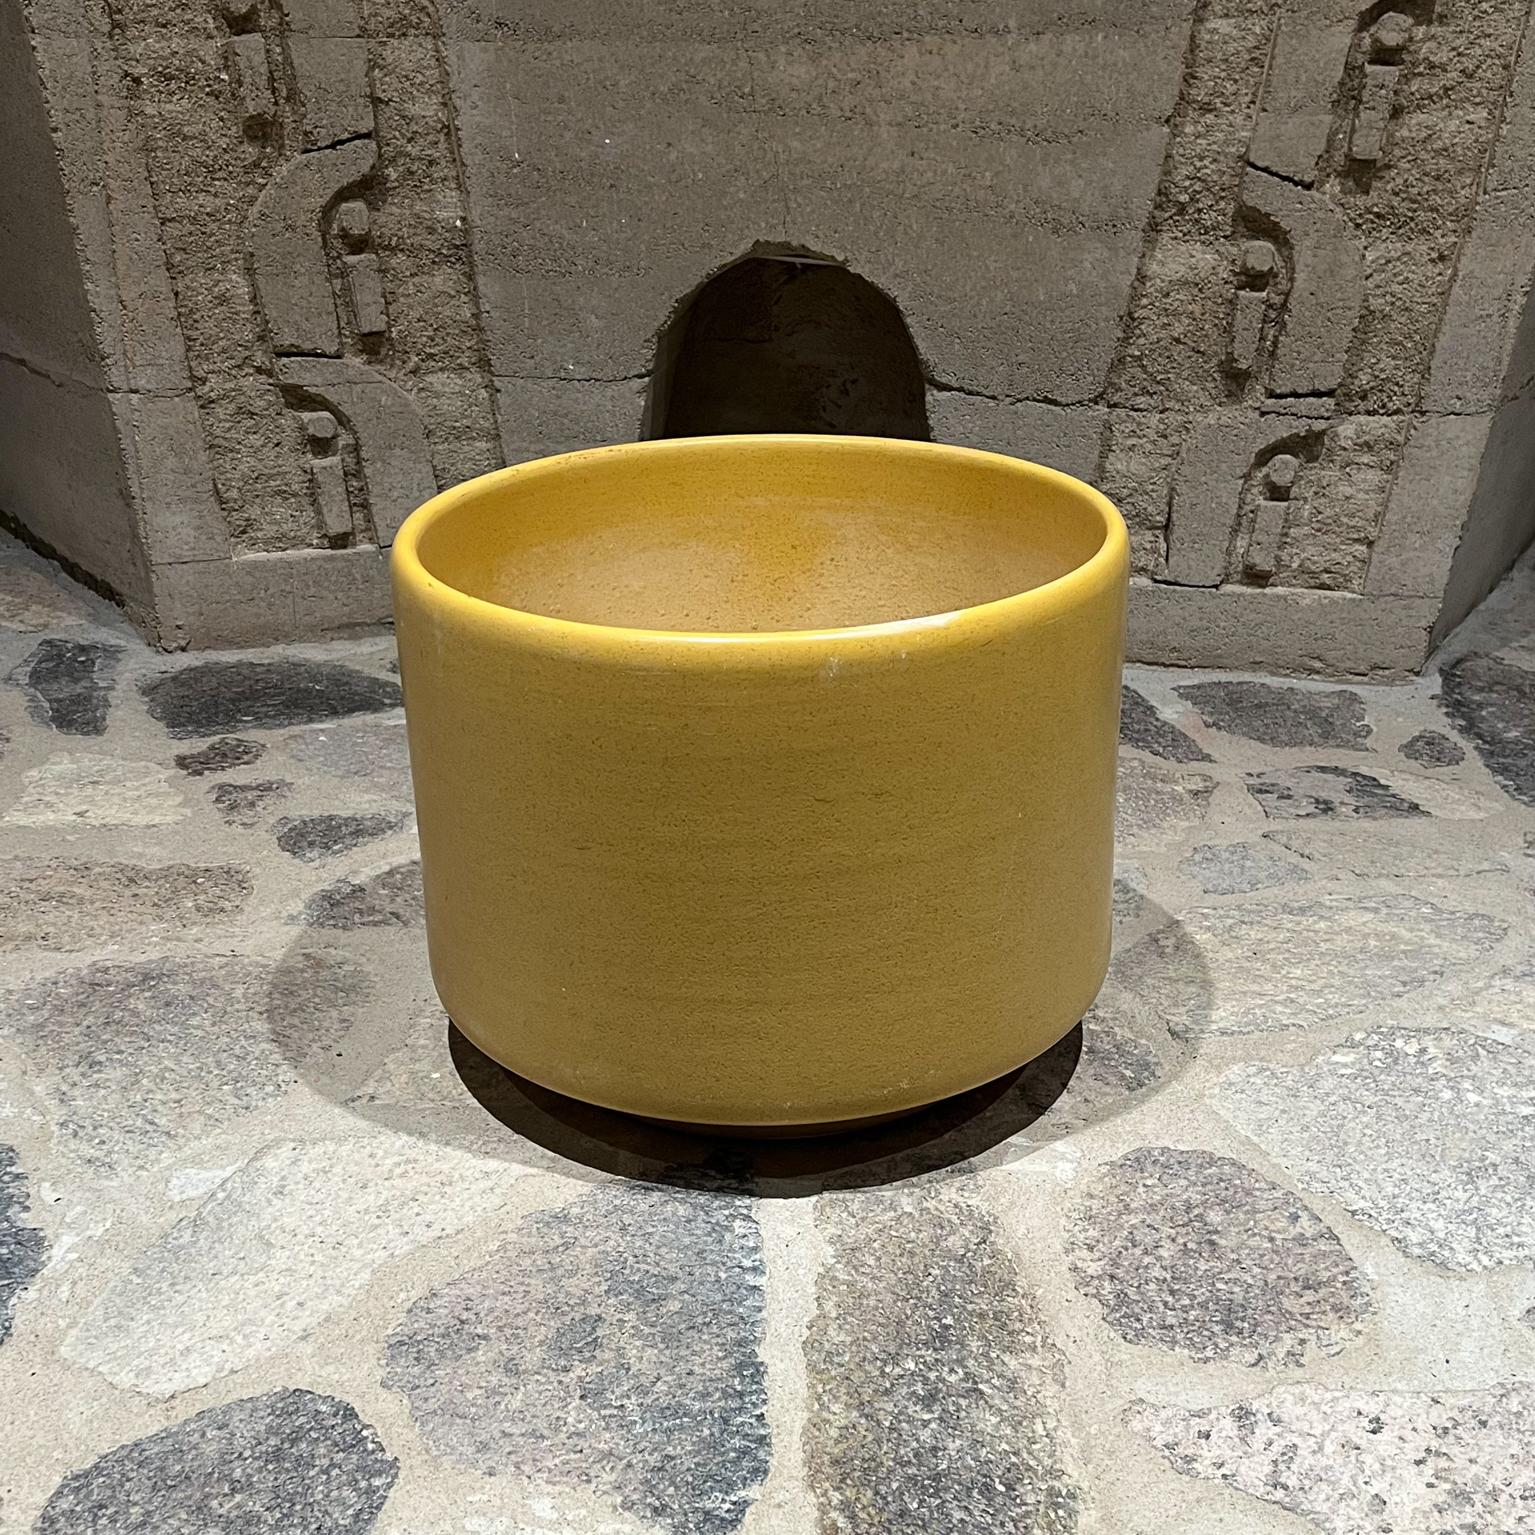 1960s Modern yellow mid century architectural planter pot.
Measures: 13 tall x 17 diameter.
Planter Pot garden patio home.
Style of Gainey Pottery. Signed underneath with maker's label. Difficult to read.
Original preowned unrestored vintage